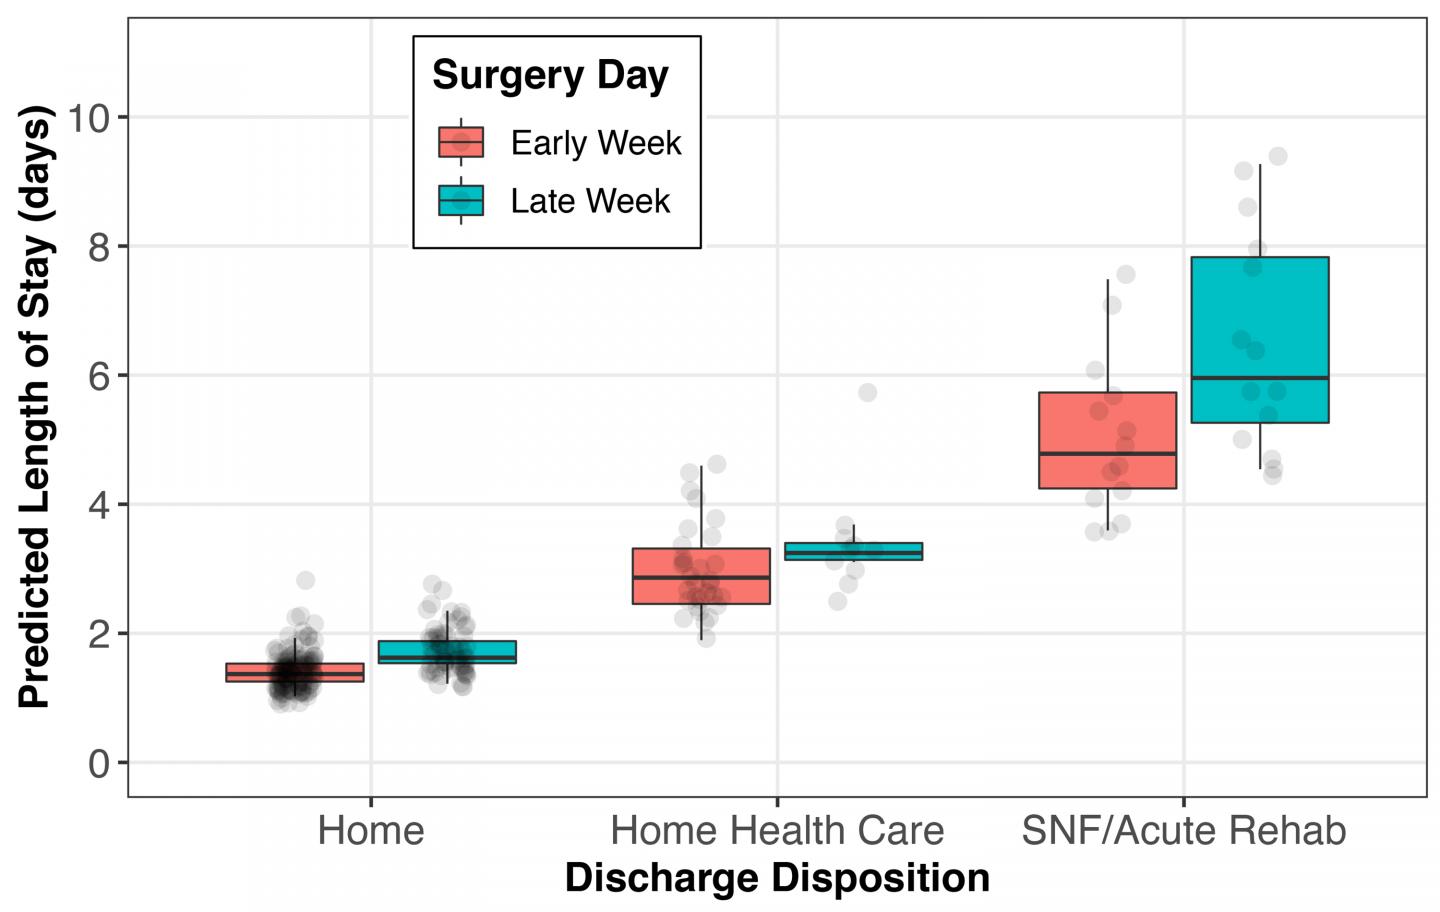 Longer Stay, Greater Costs Related to Late-Week Laminectomy & Discharge to Specialty Care